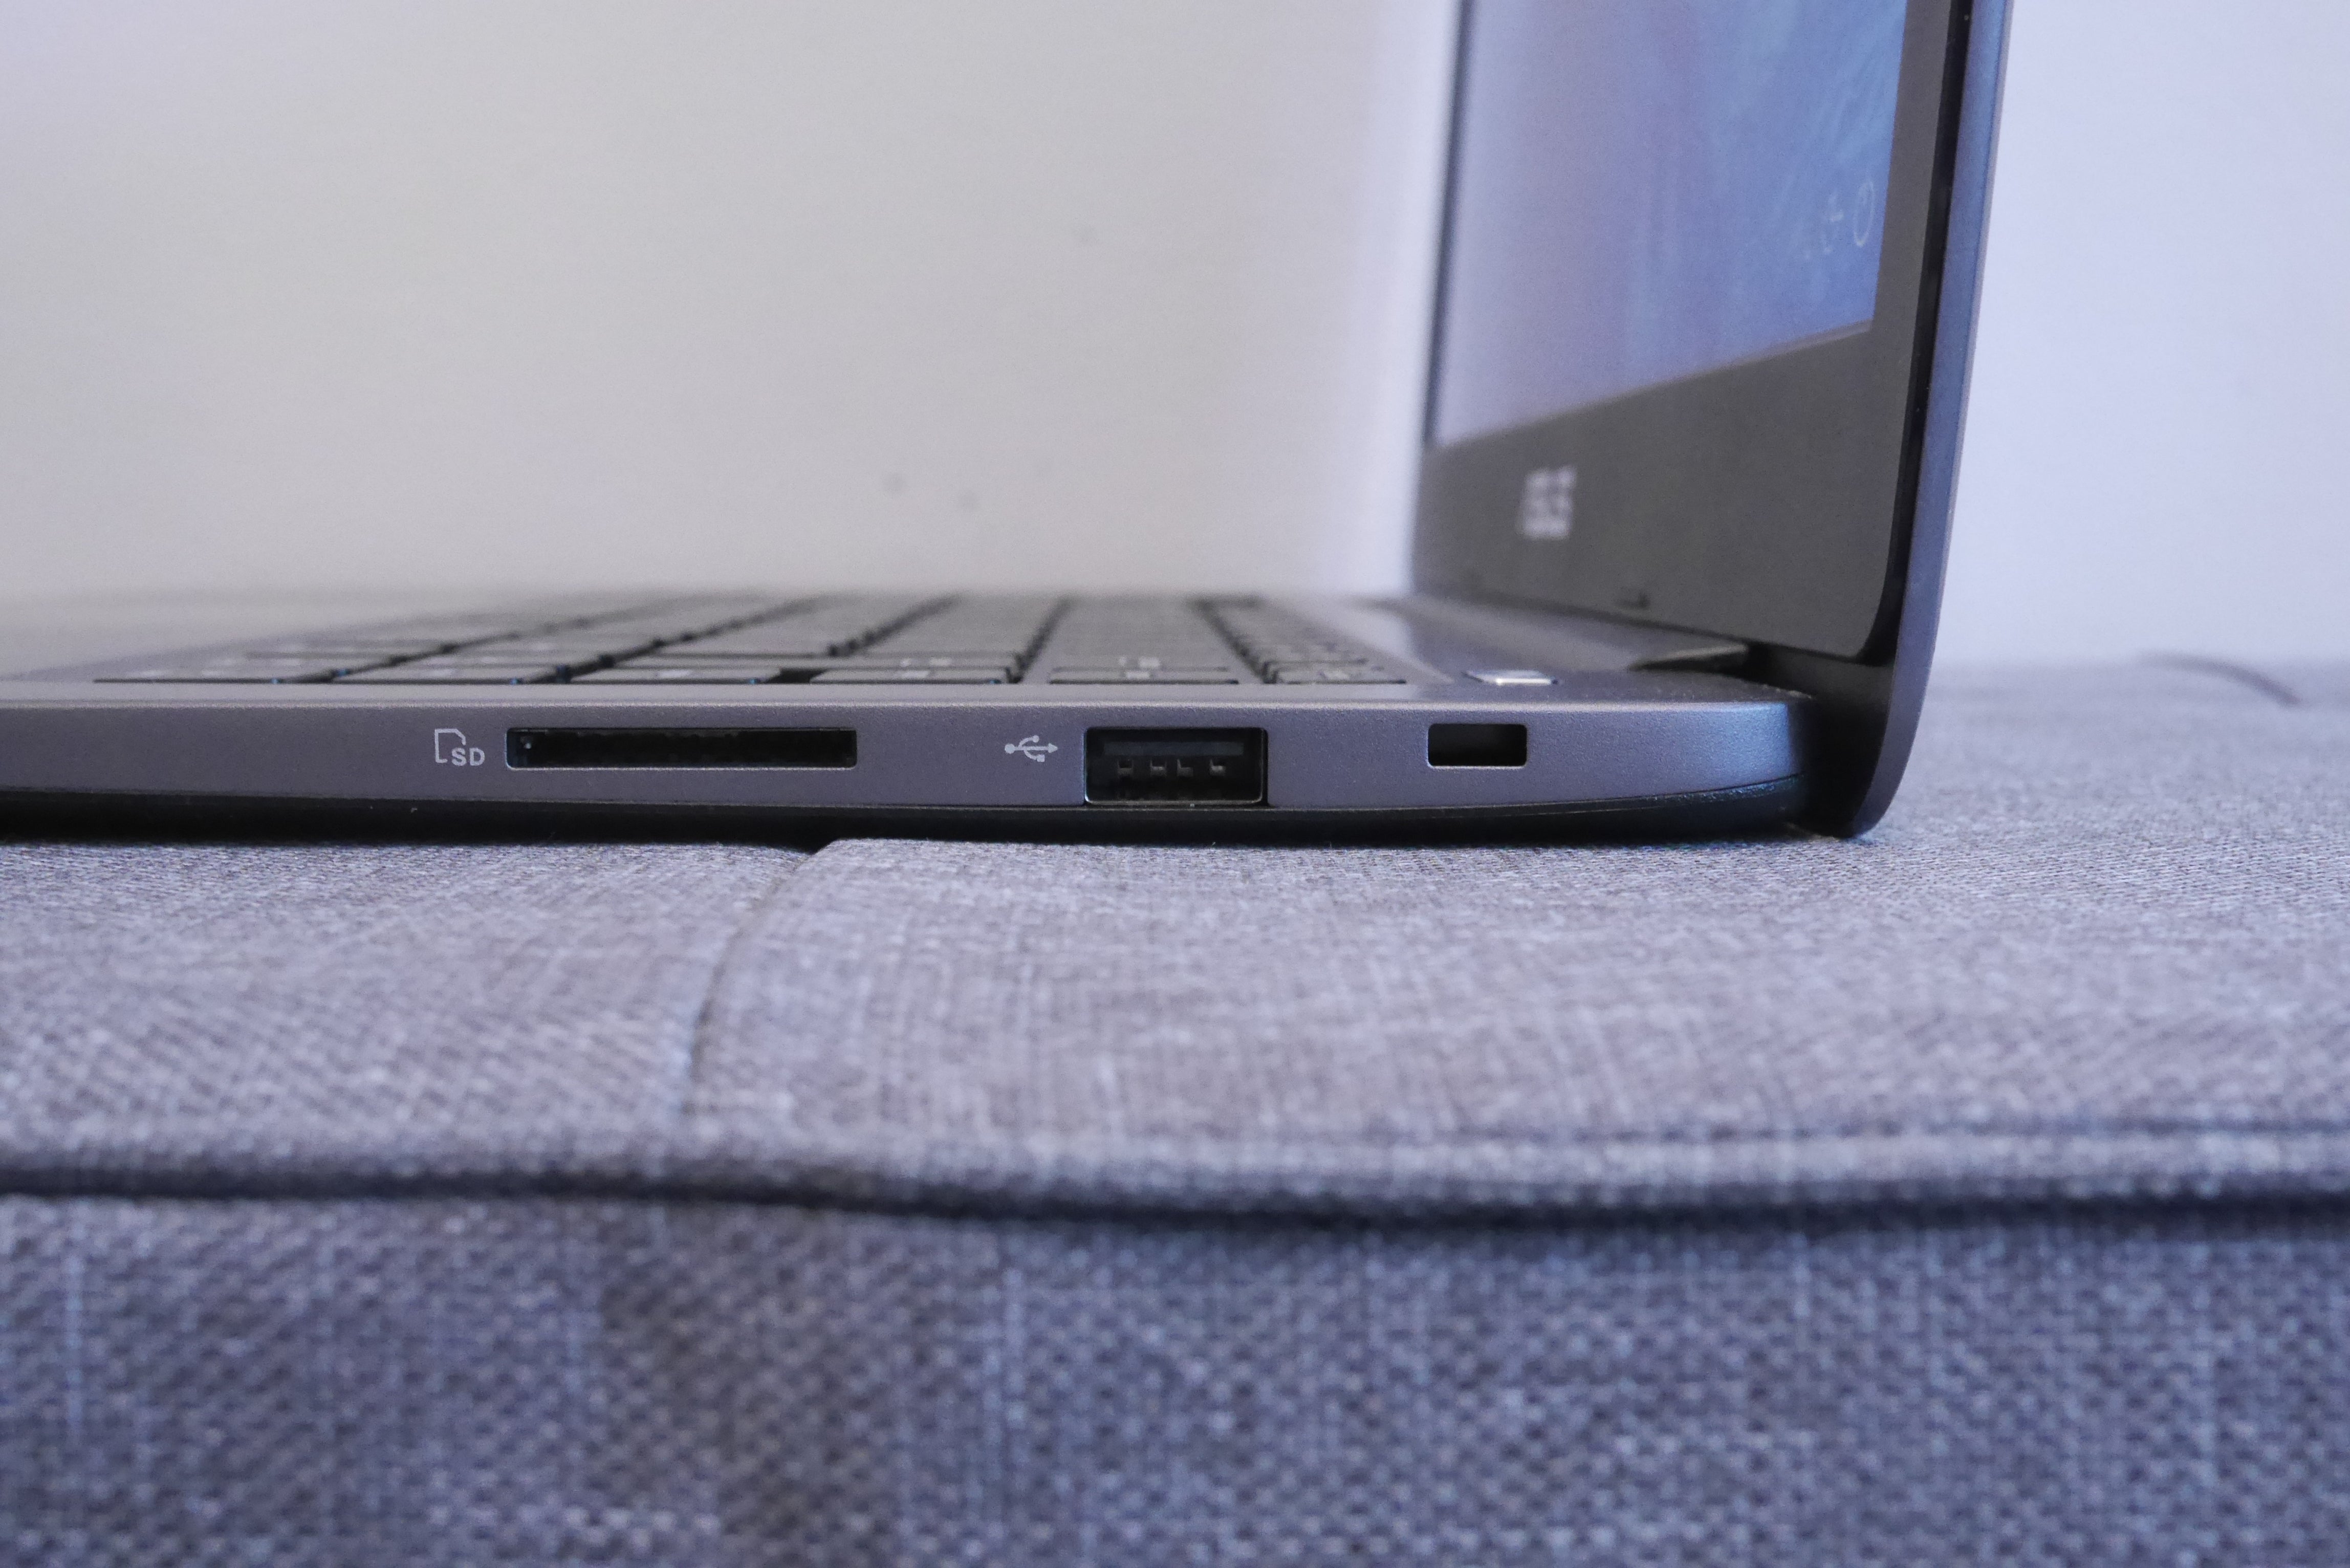 Side view of Asus VivoBook L403 showing ports.